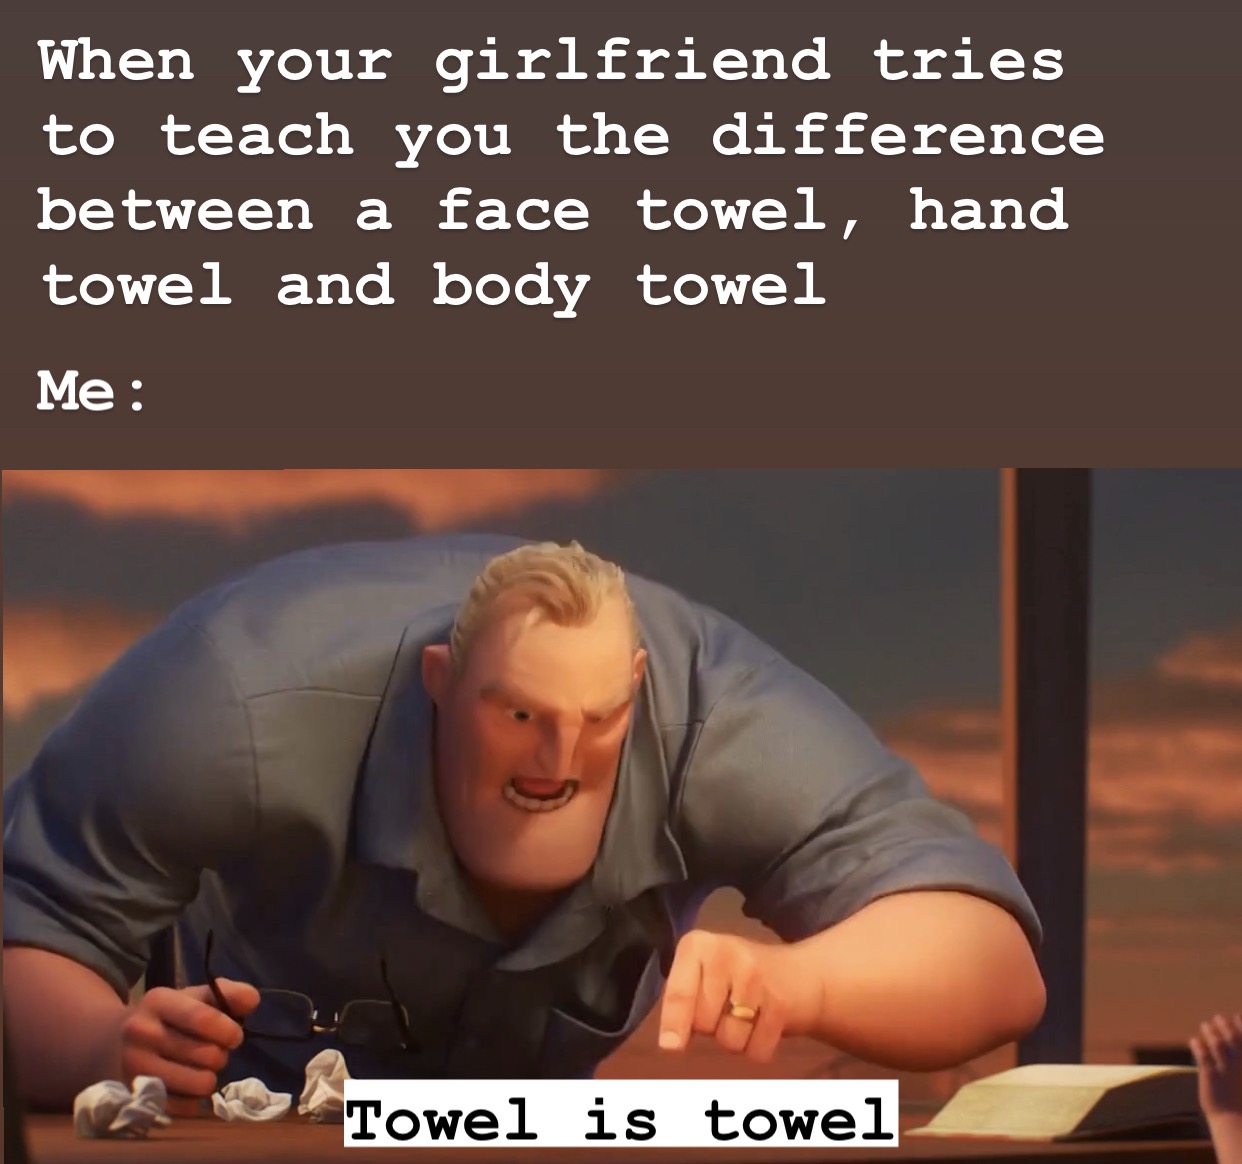 dank memes - funny memes - mr incredible meme - When your girlfriend tries to teach you the difference between a face towel, hand towel and body towel Me Towel is towel